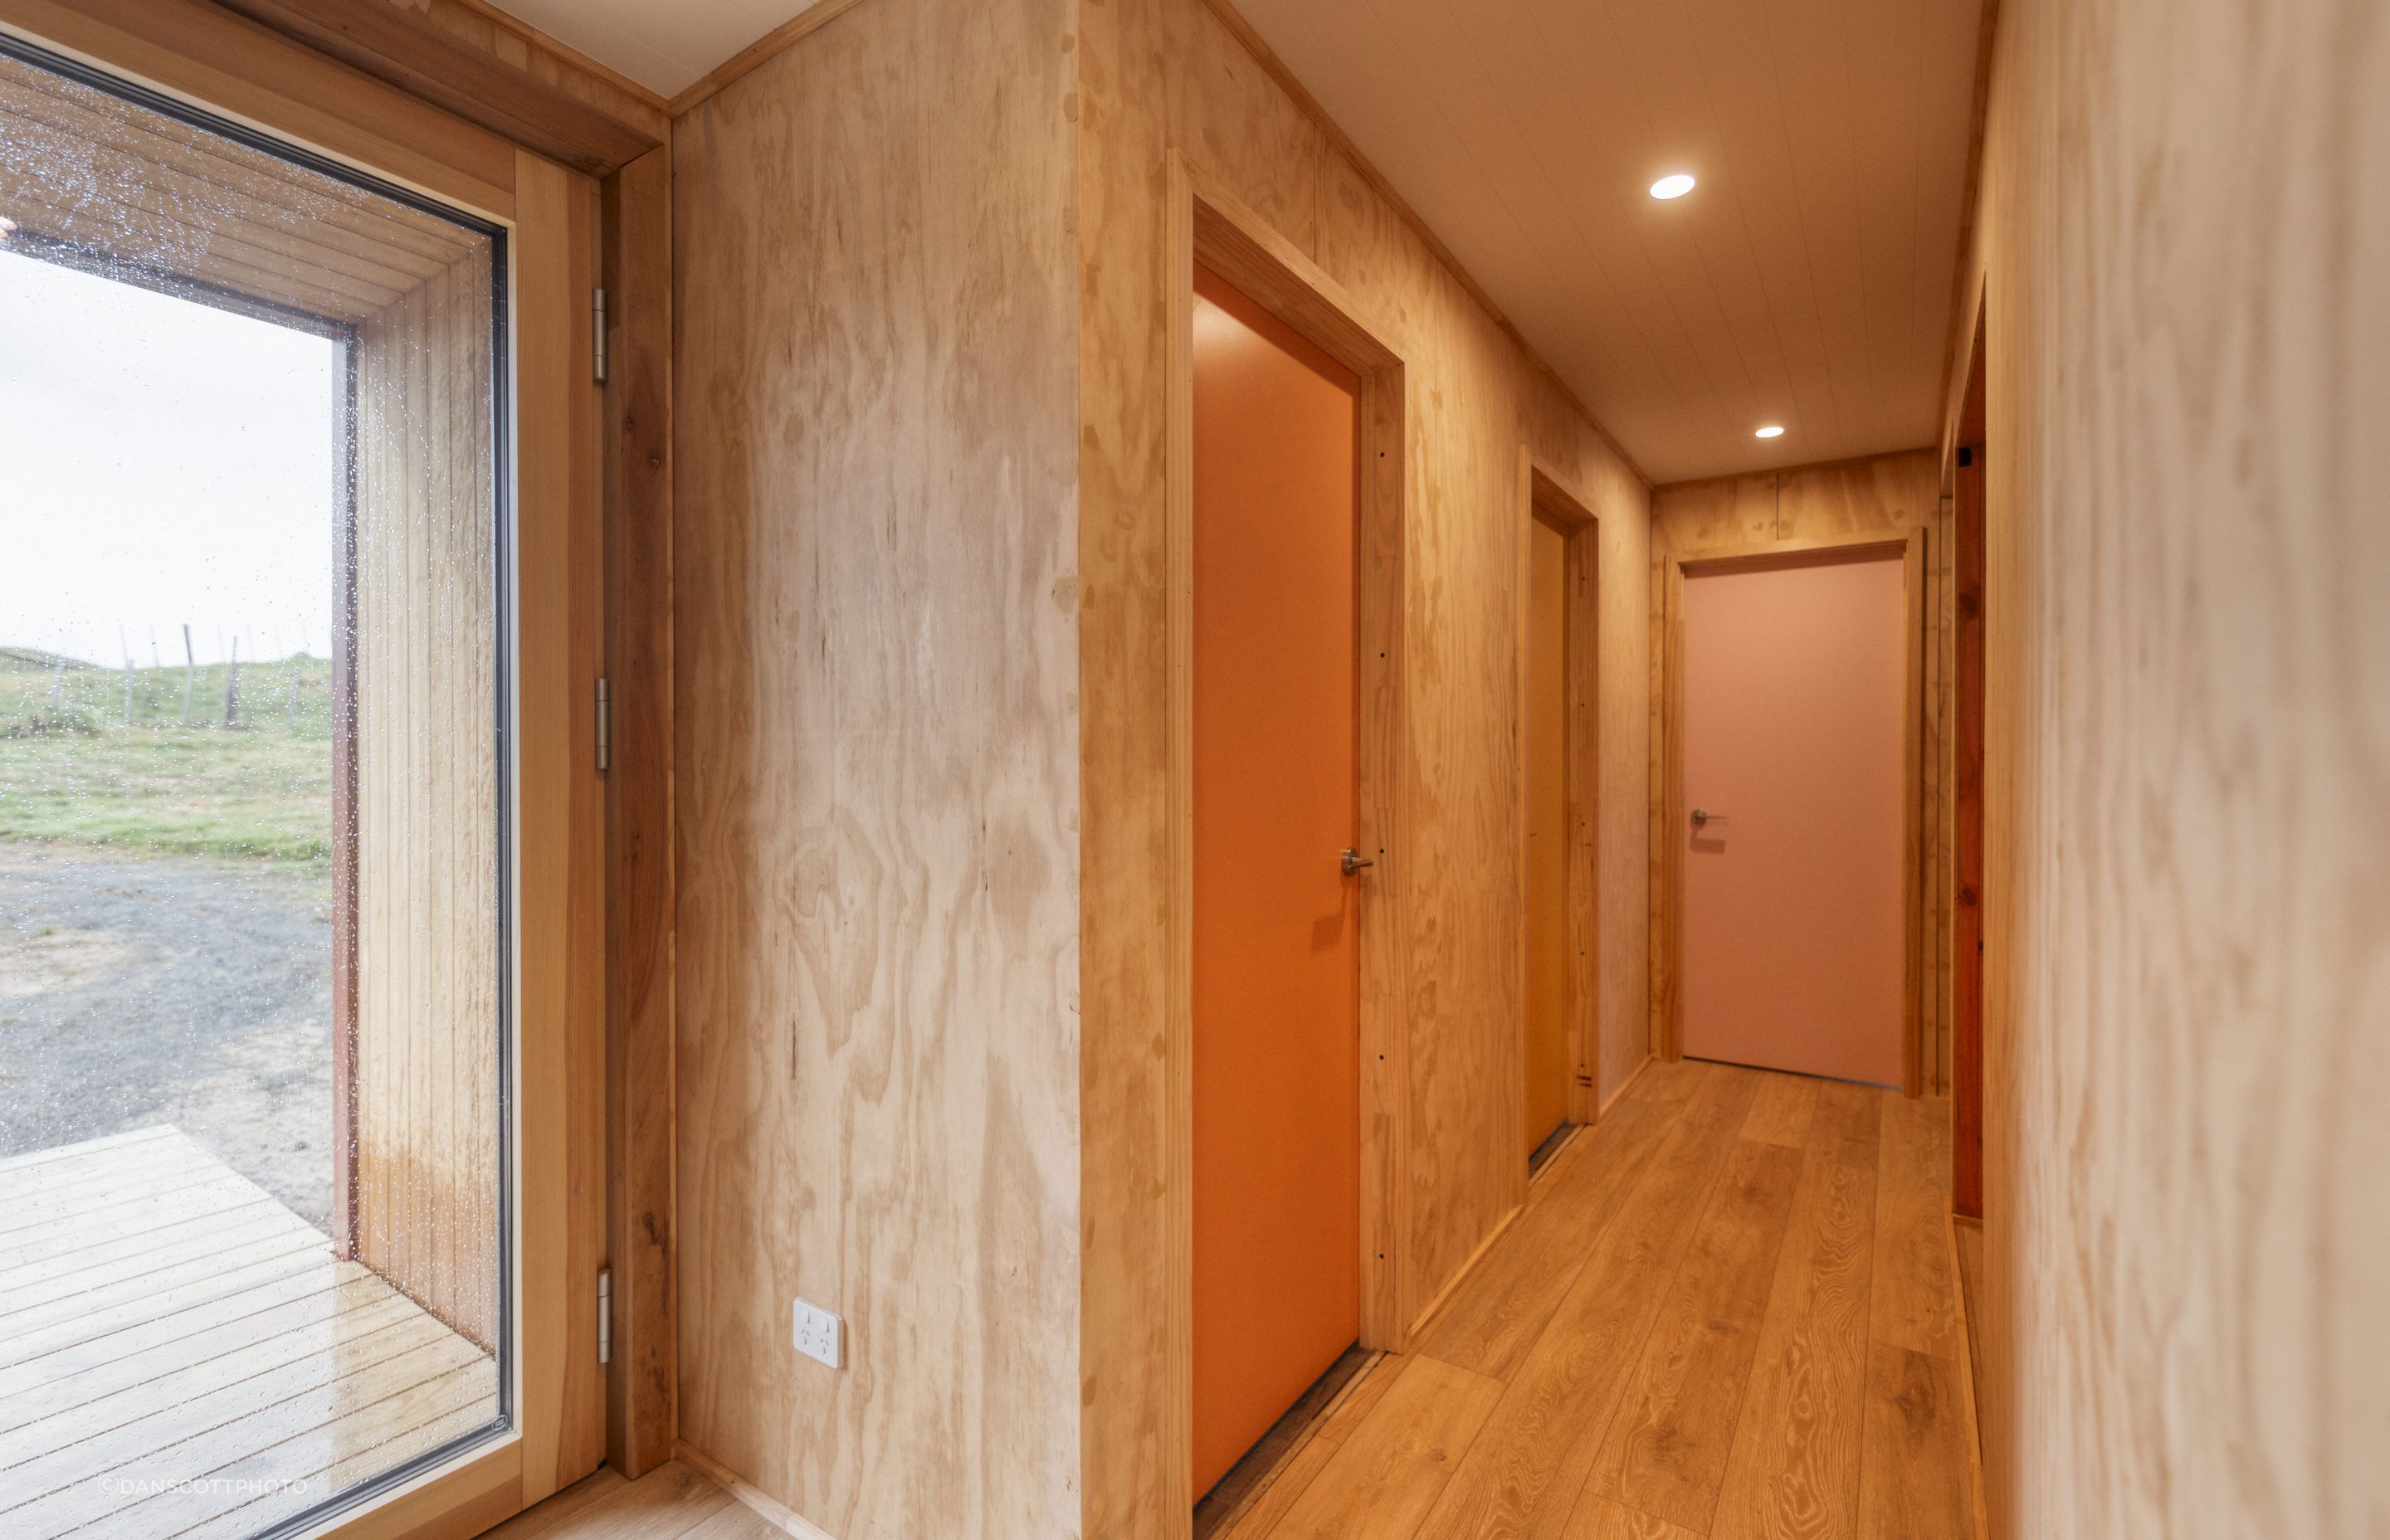 A Resene colour expert helped create a cohesive palette of seven colours for the interior doors. The oak laminate flooring throughout the downstairs area is from Bunnings.